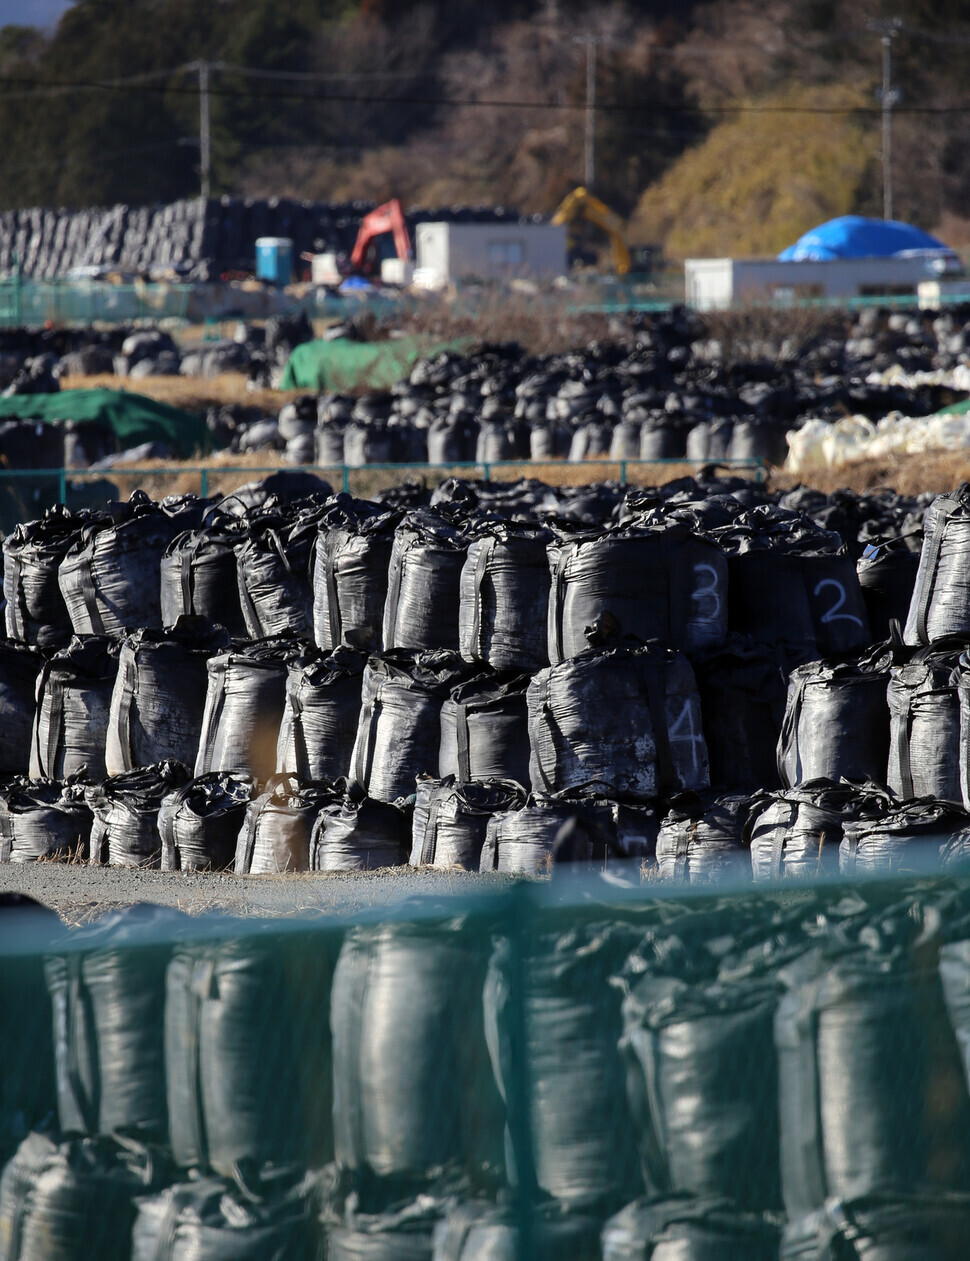 Big black plastic bags containing radiated soil, leaves and debris from the decontamination operation are dumped at a temporary site. (Yonhap News)